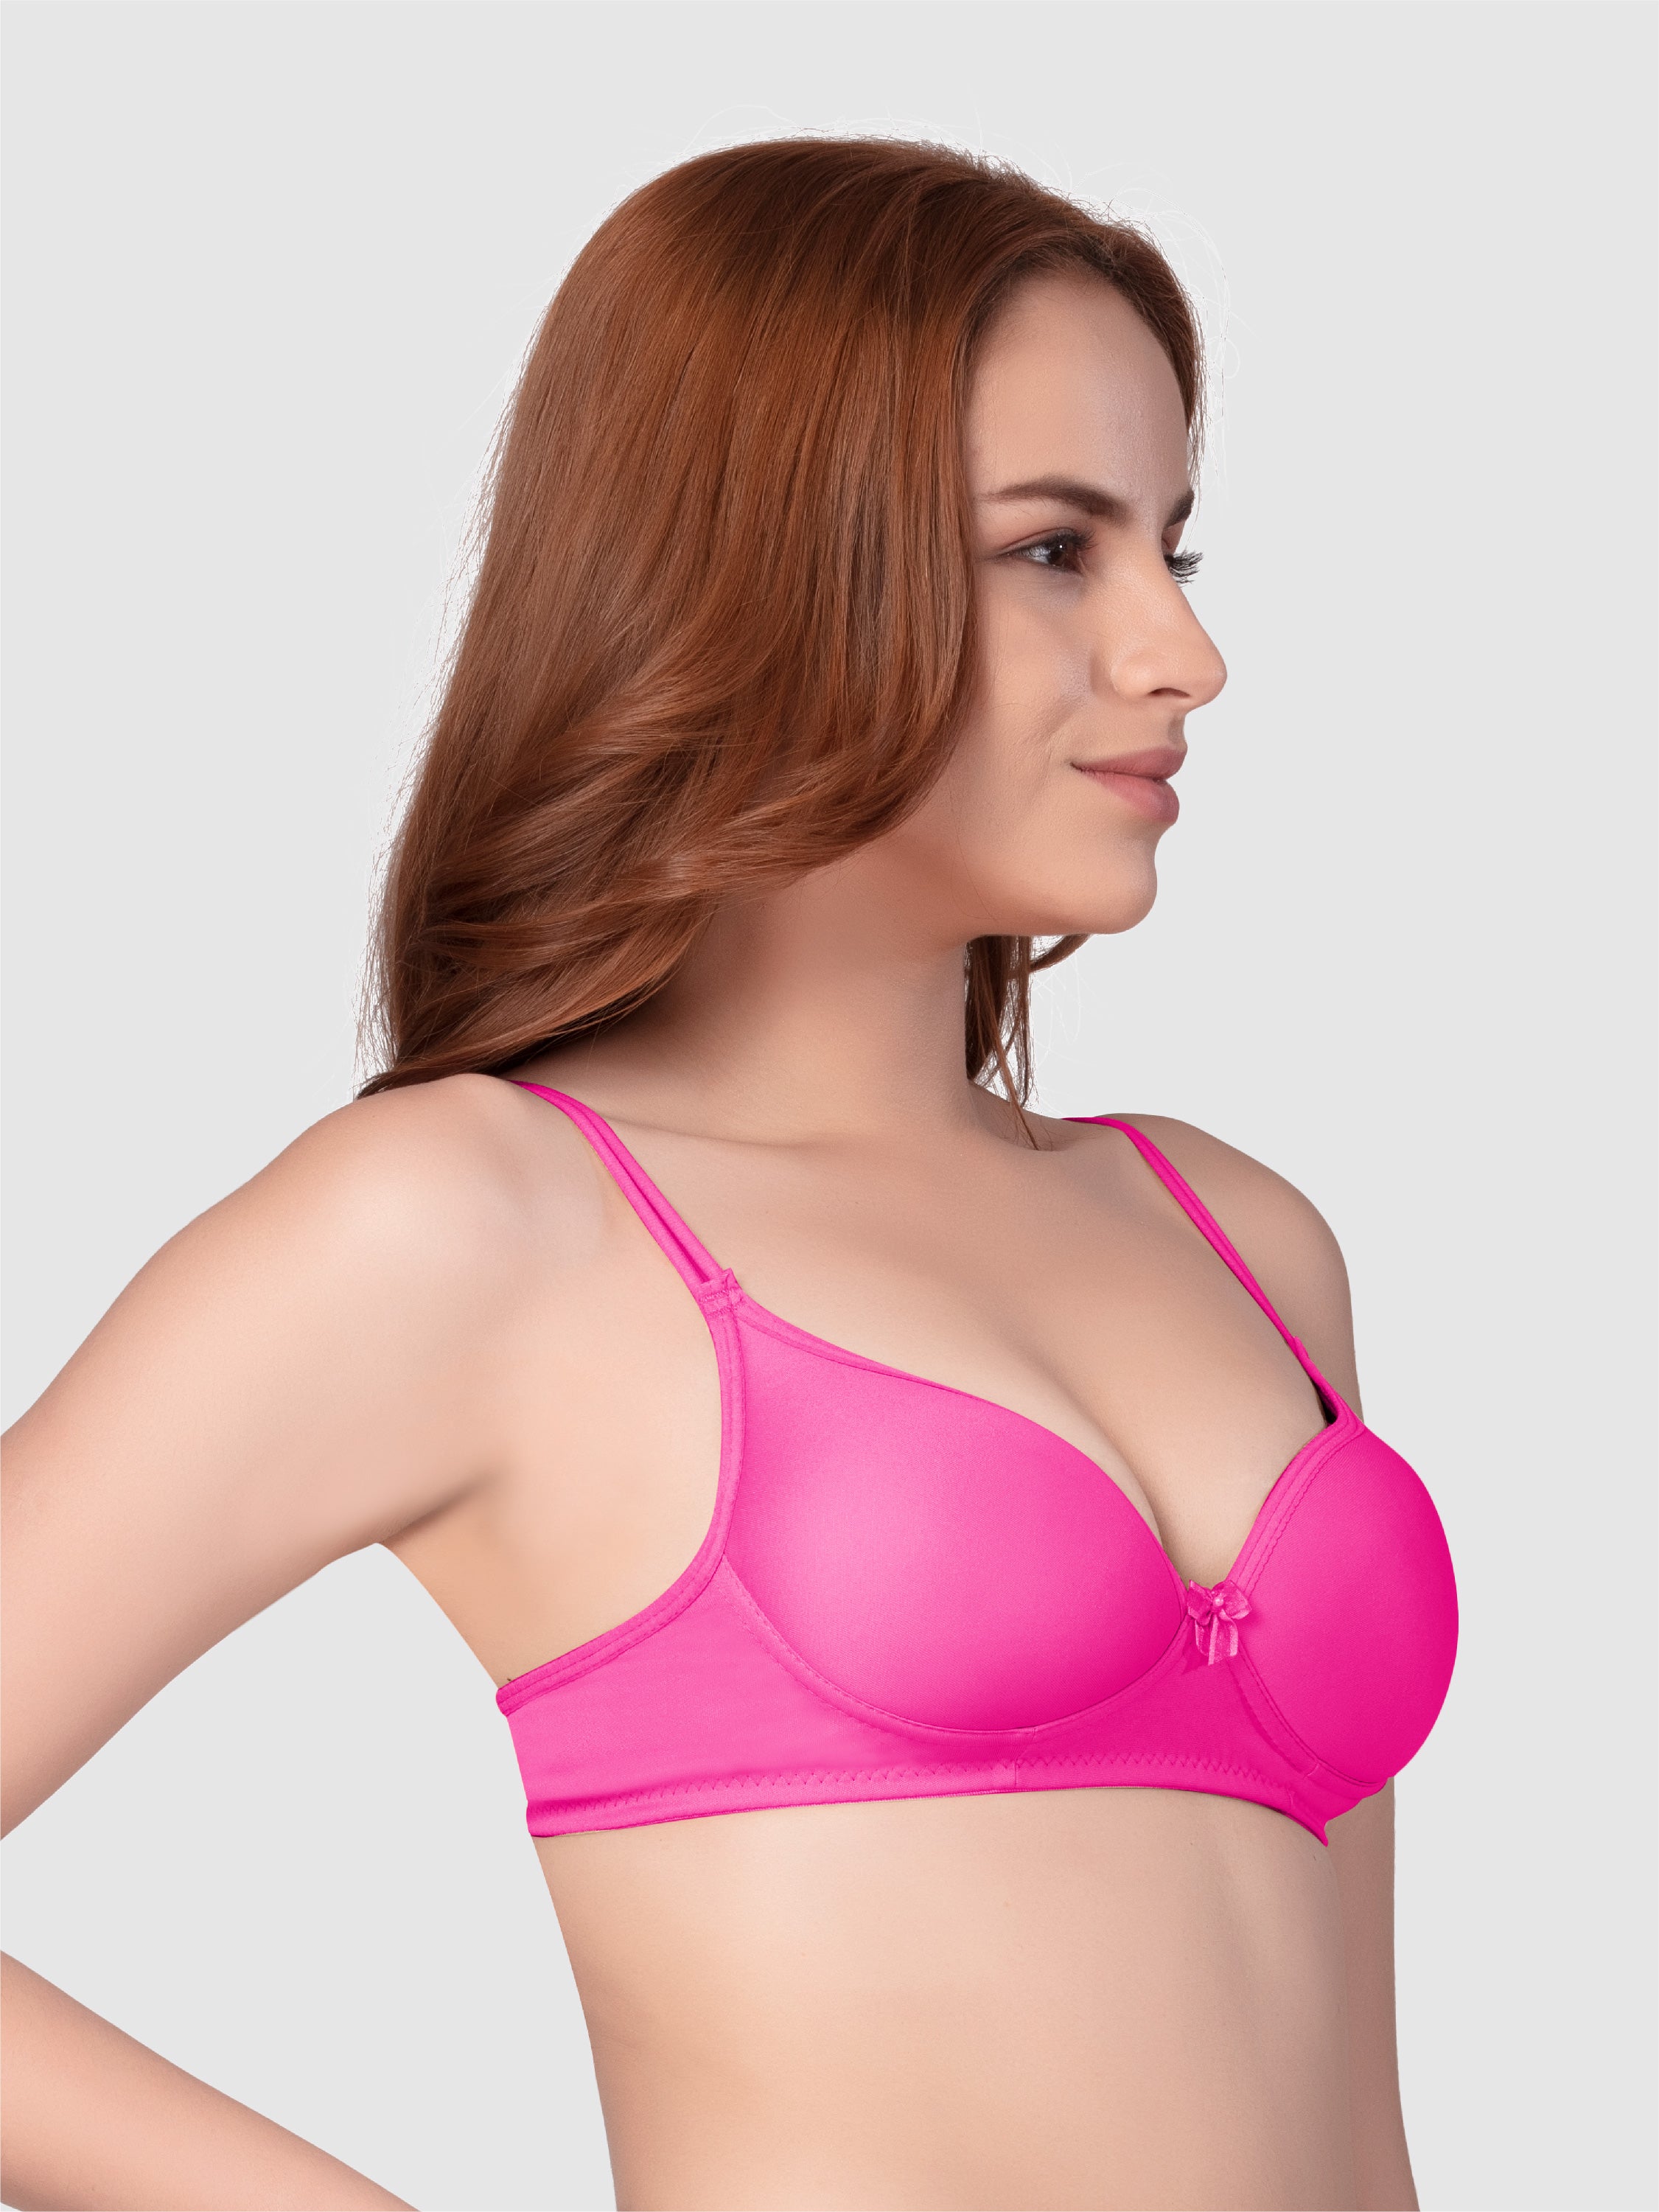 Daisy Dee Dark Pink Padded Non Wired Full Coverage Bra NKWI-D.Pink